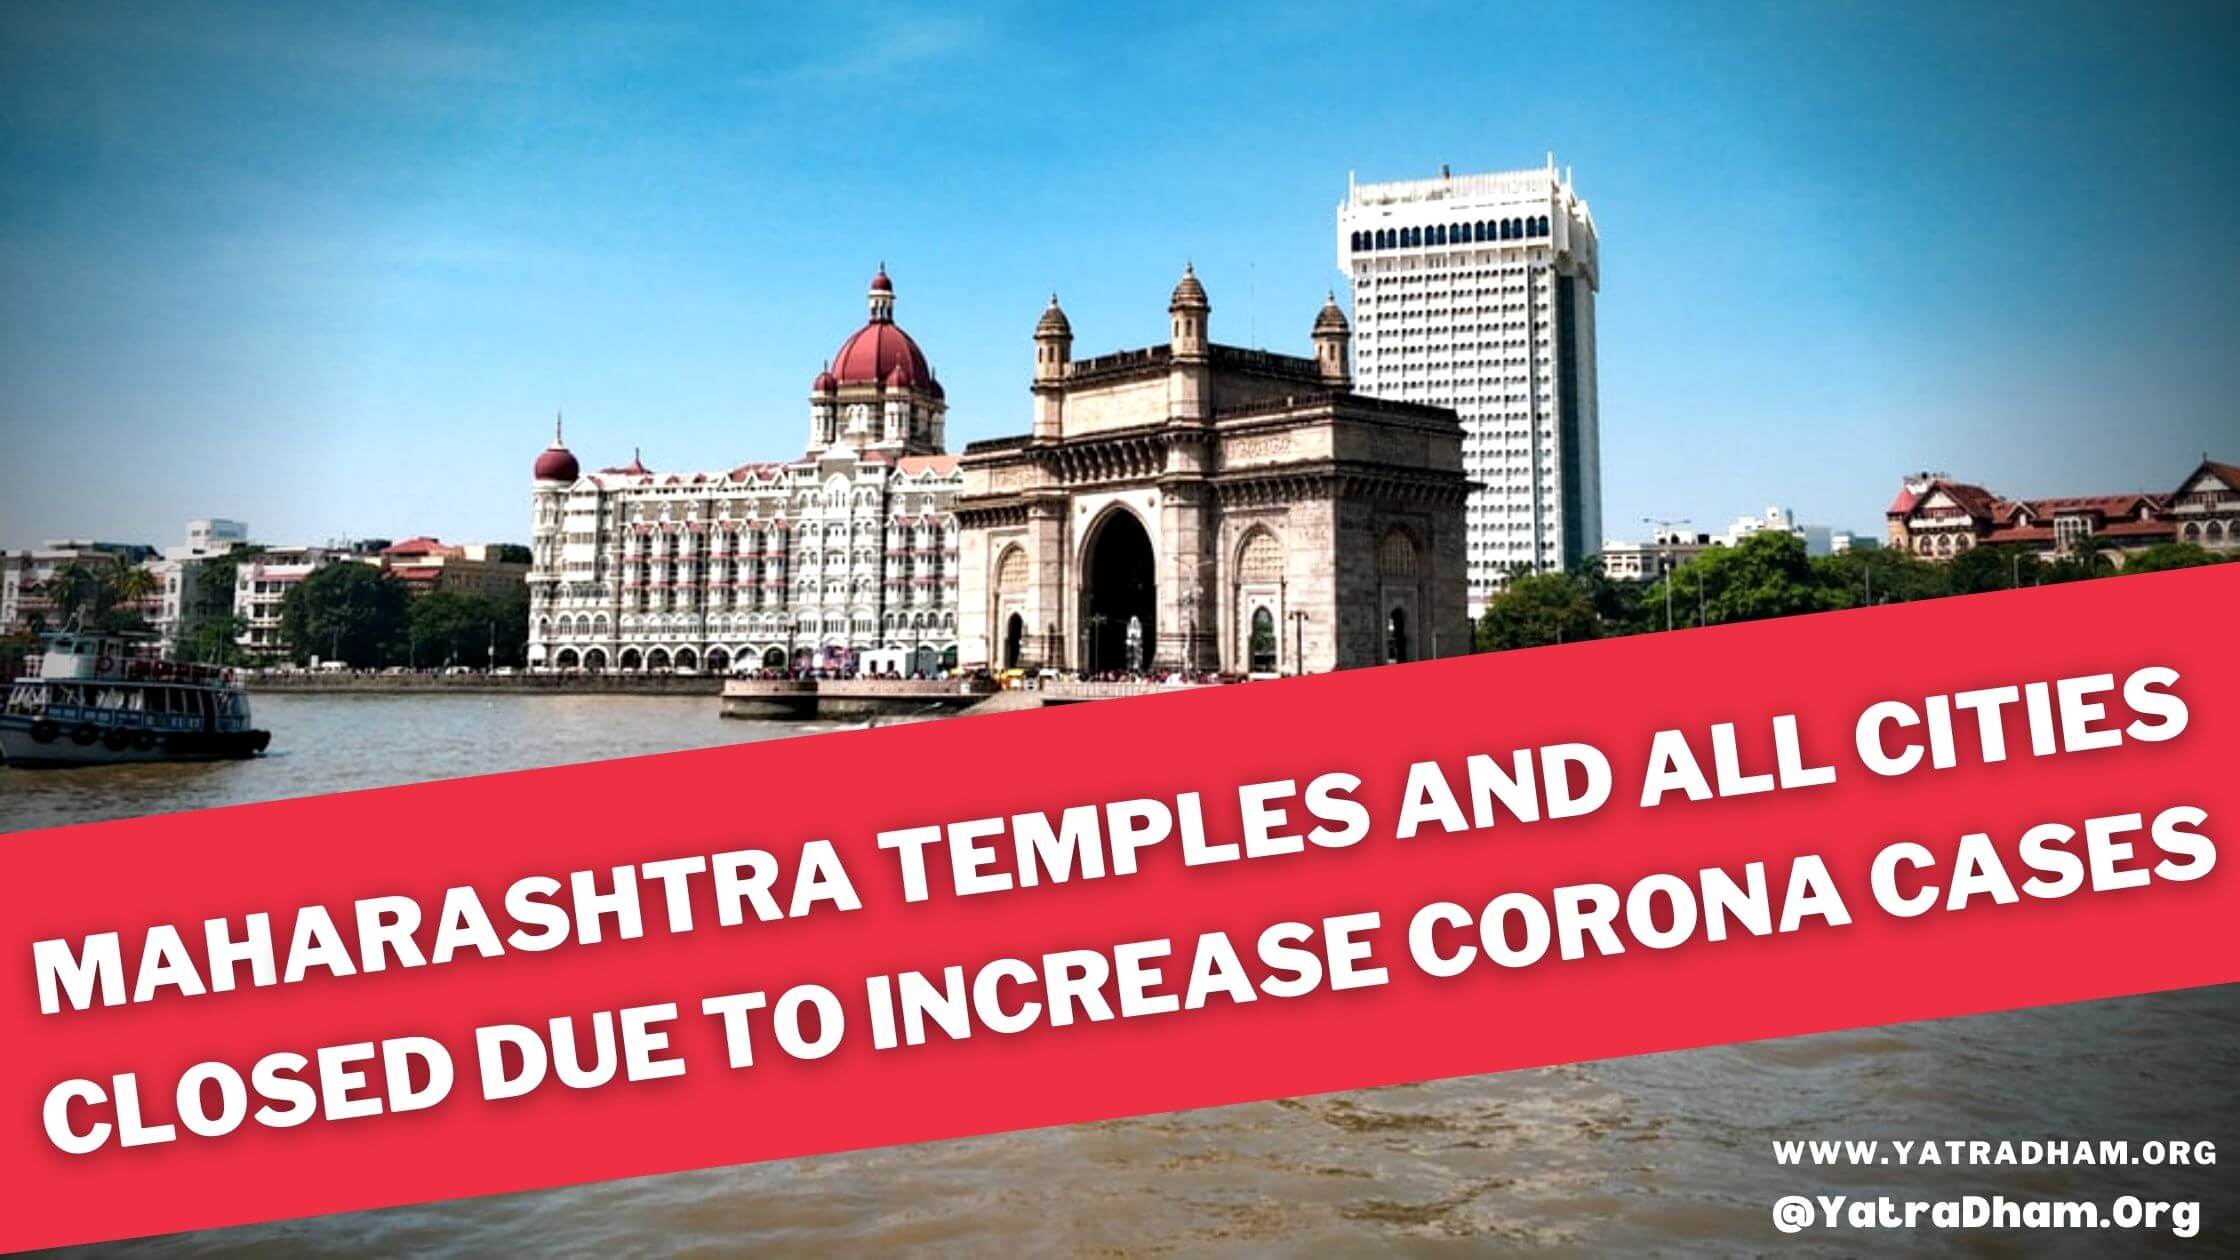 Maharashtra-Temples-and-all-cities-closed-due-to-increase-corona-cases.